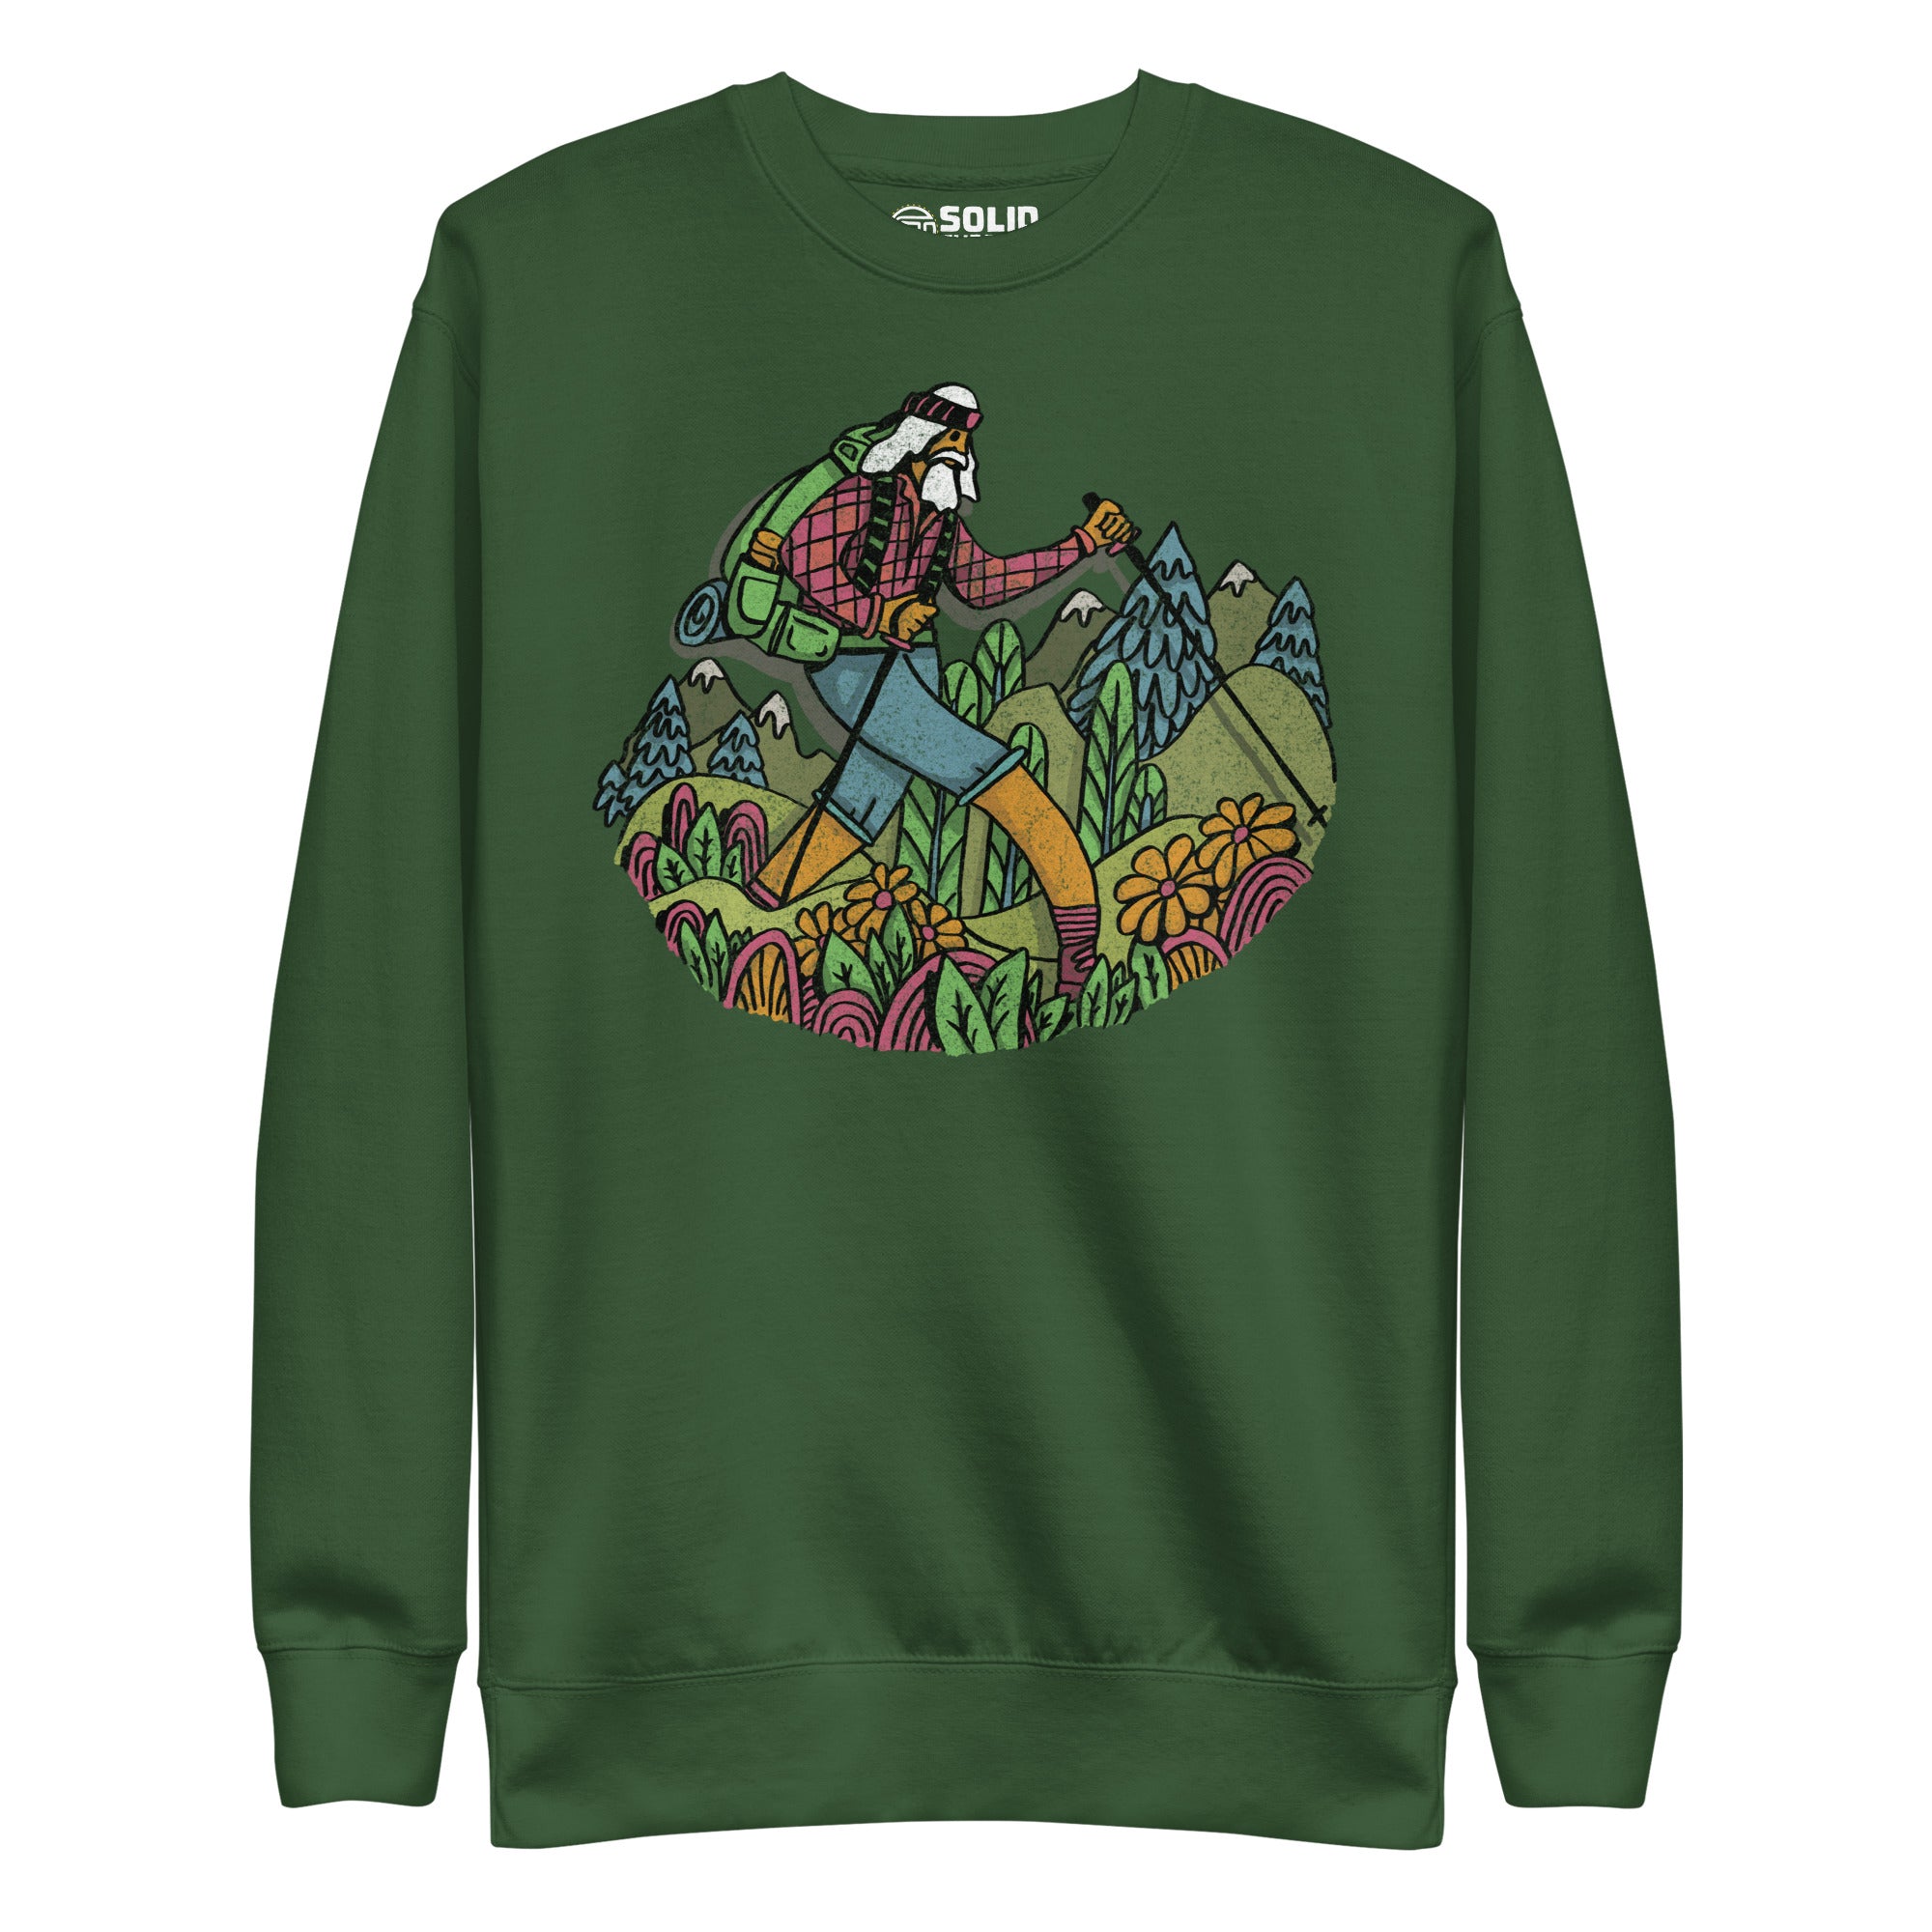 Wise Hiker | Design By Dylan Fant Cool Classic Sweatshirt | Vintage Outdoorsy Fleece | Solid Threads